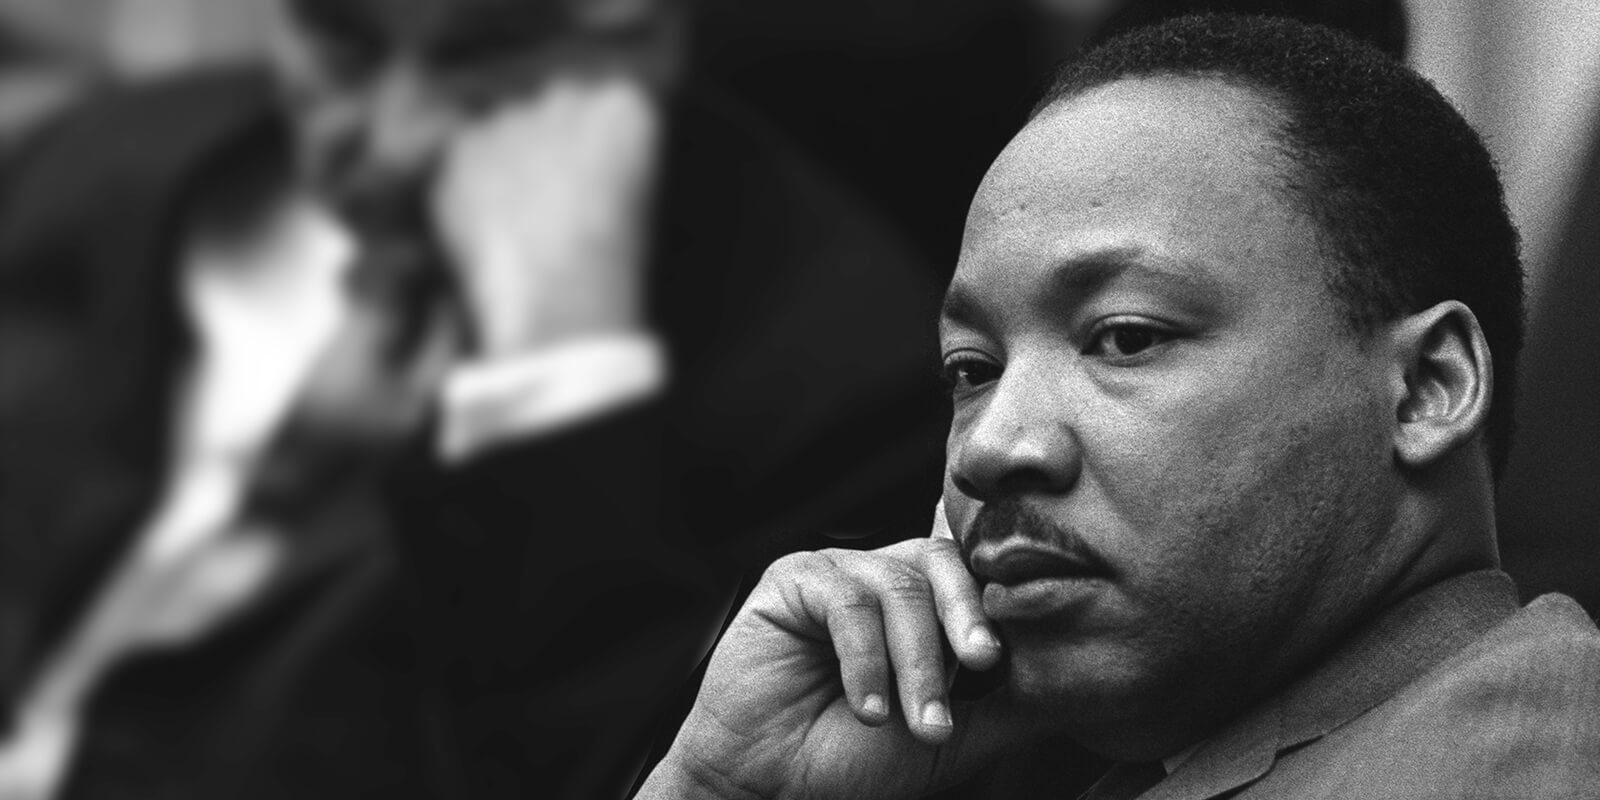 Advancing Dr. King’s voting rights legacy